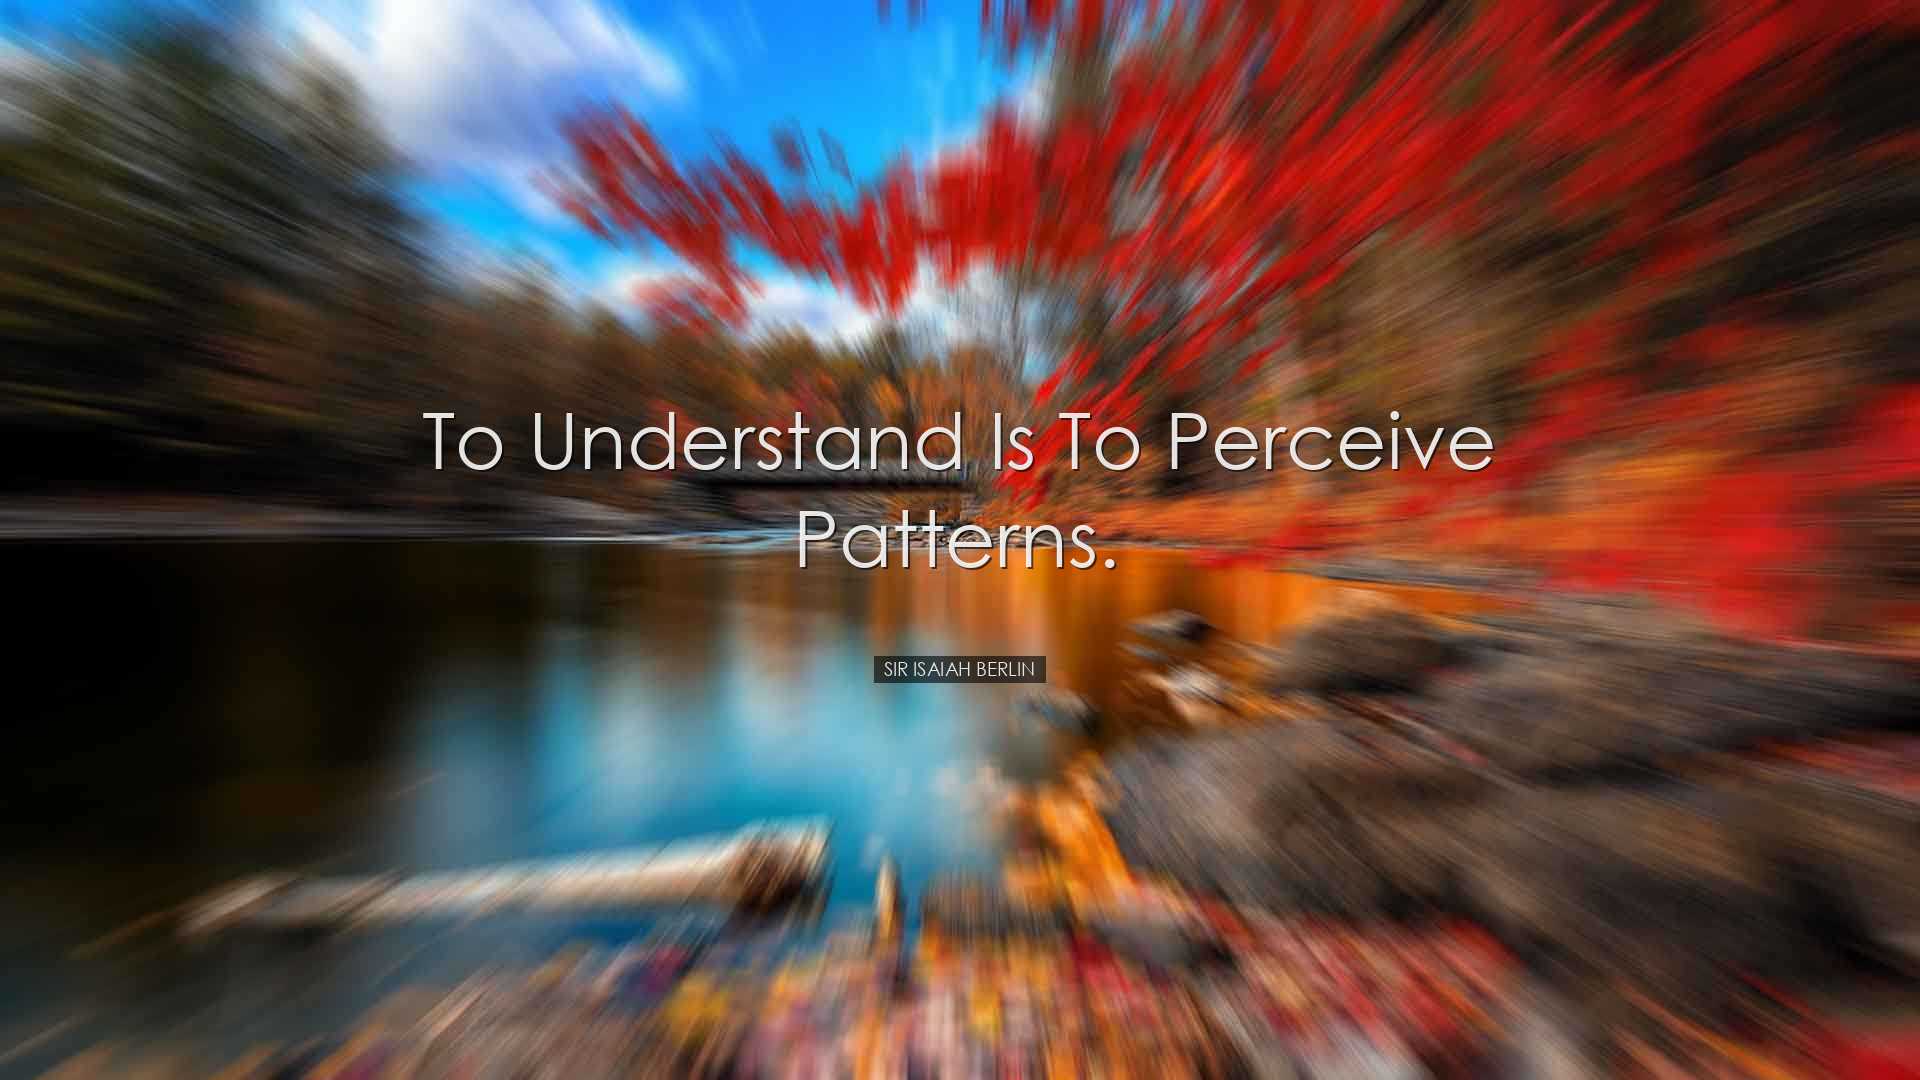 To understand is to perceive patterns. - Sir Isaiah Berlin